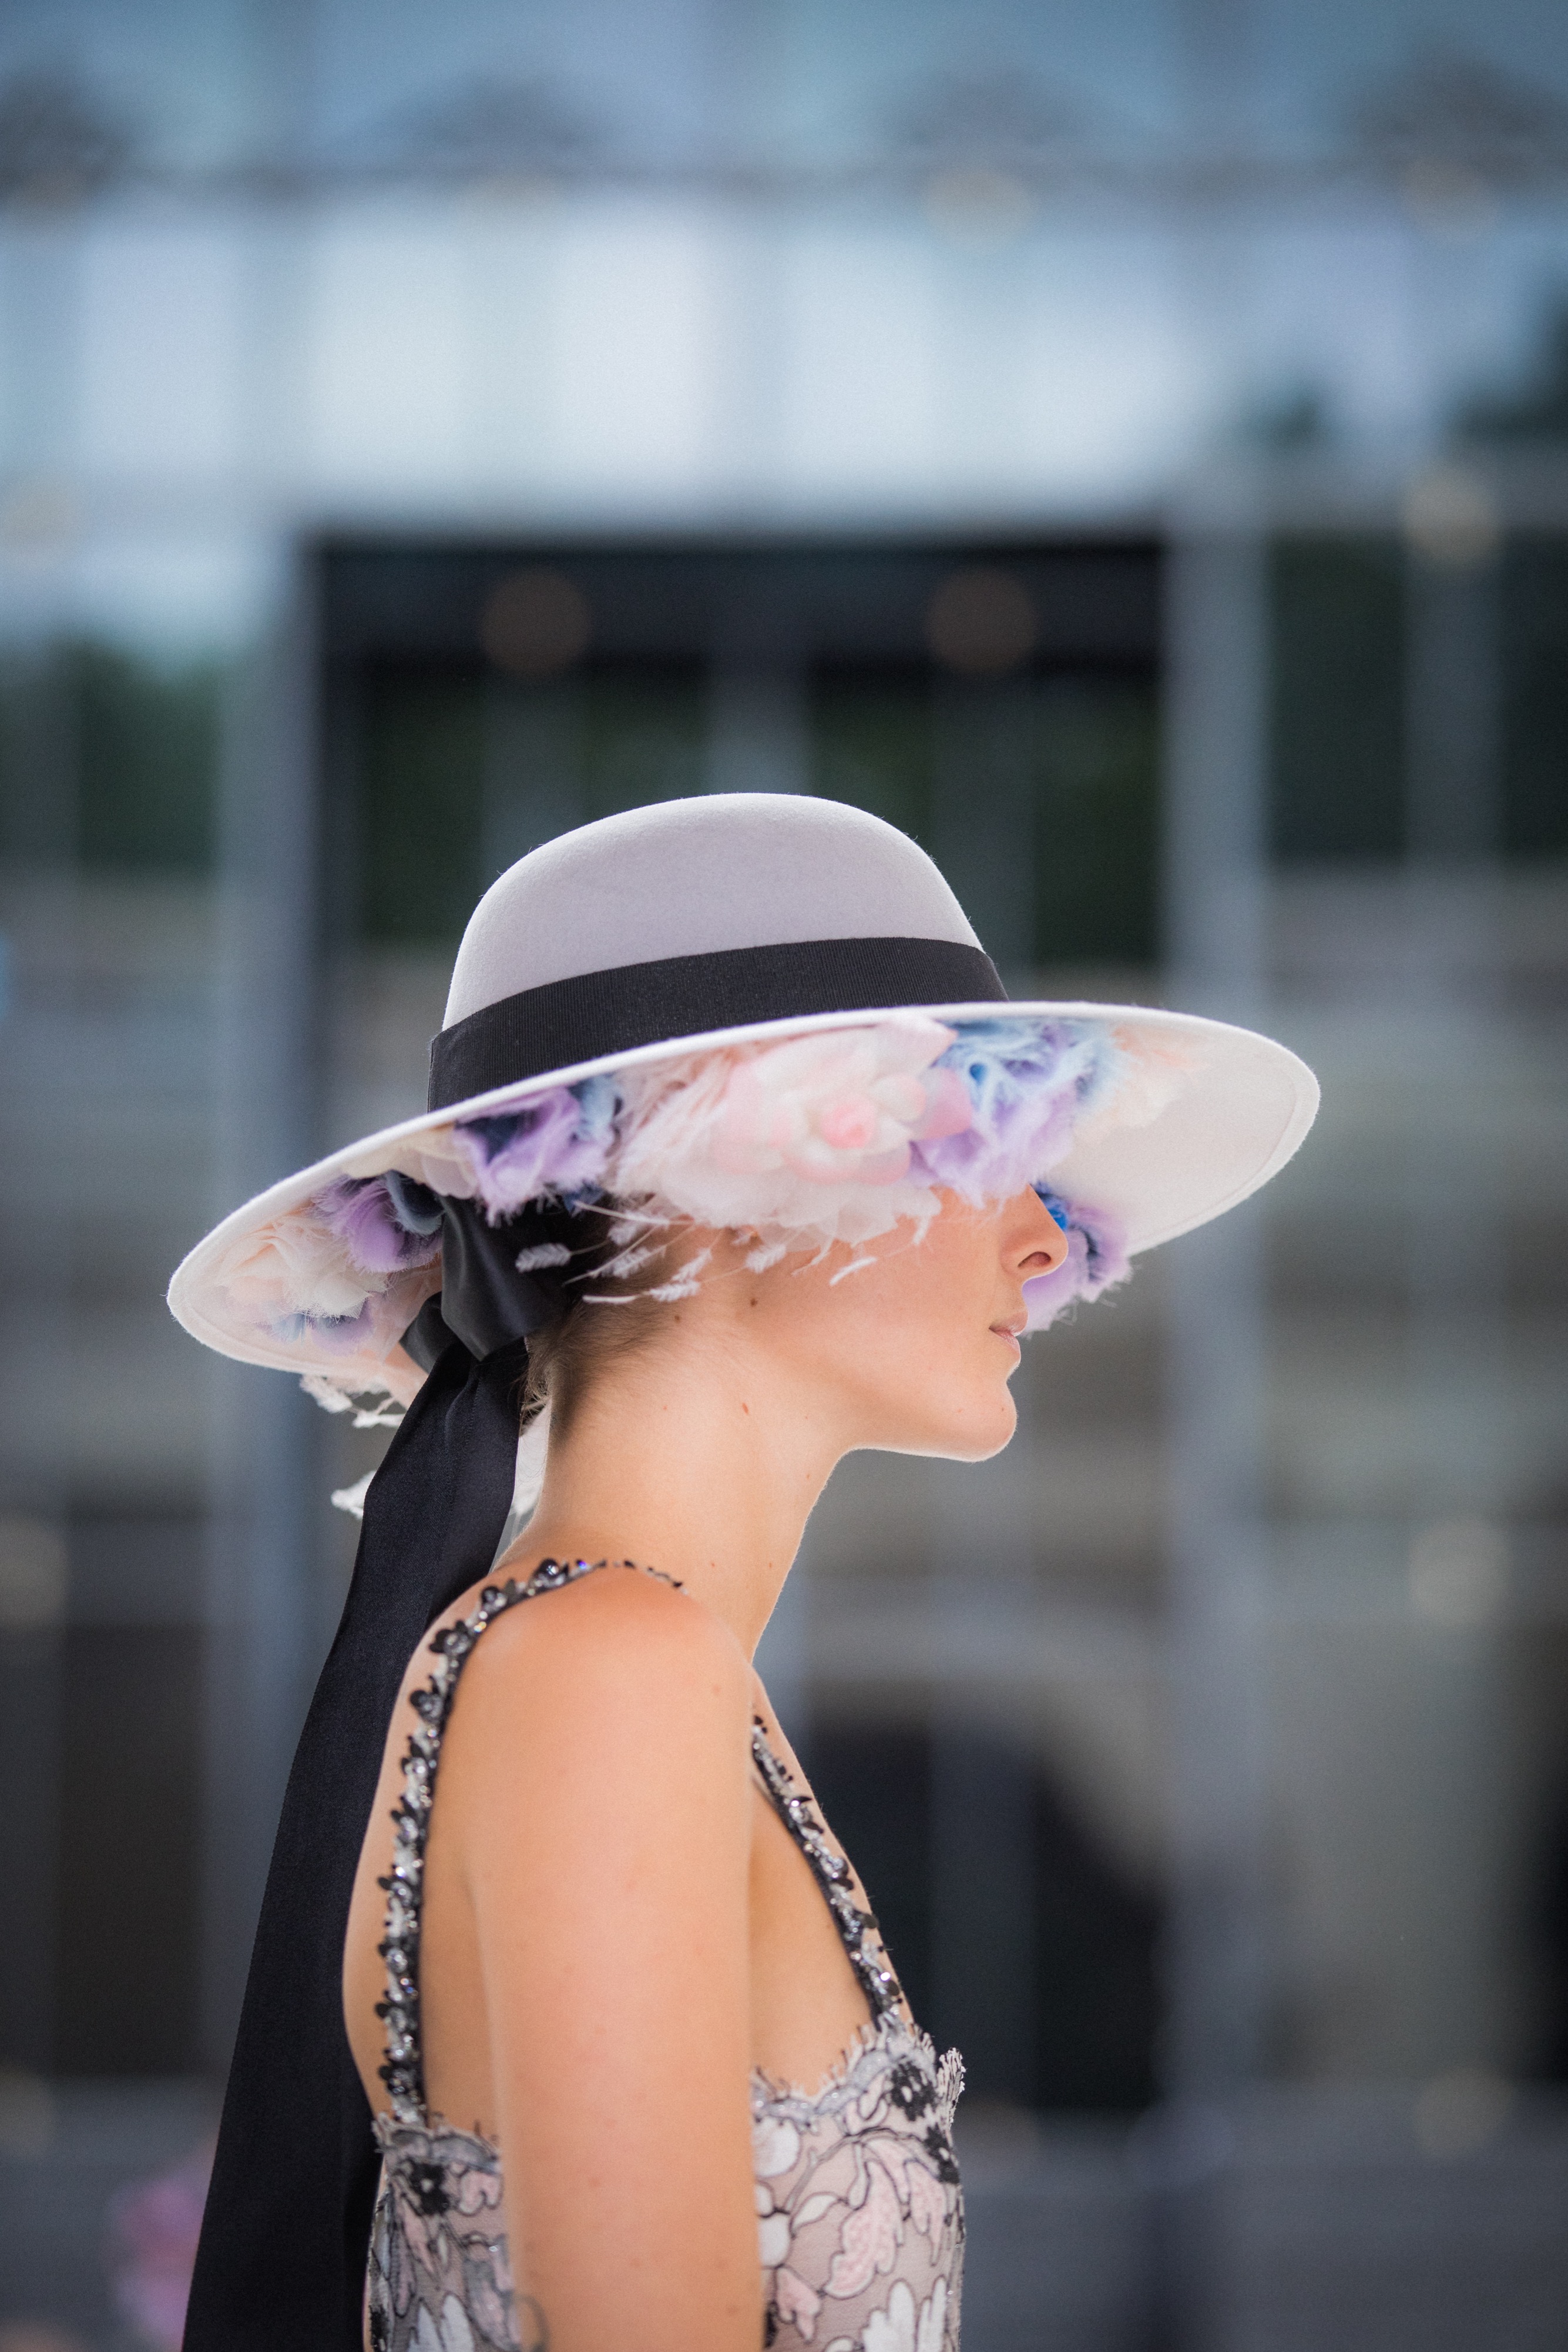 CHANEL Fall-Winter 2021/22 Haute Couture Streetstyle